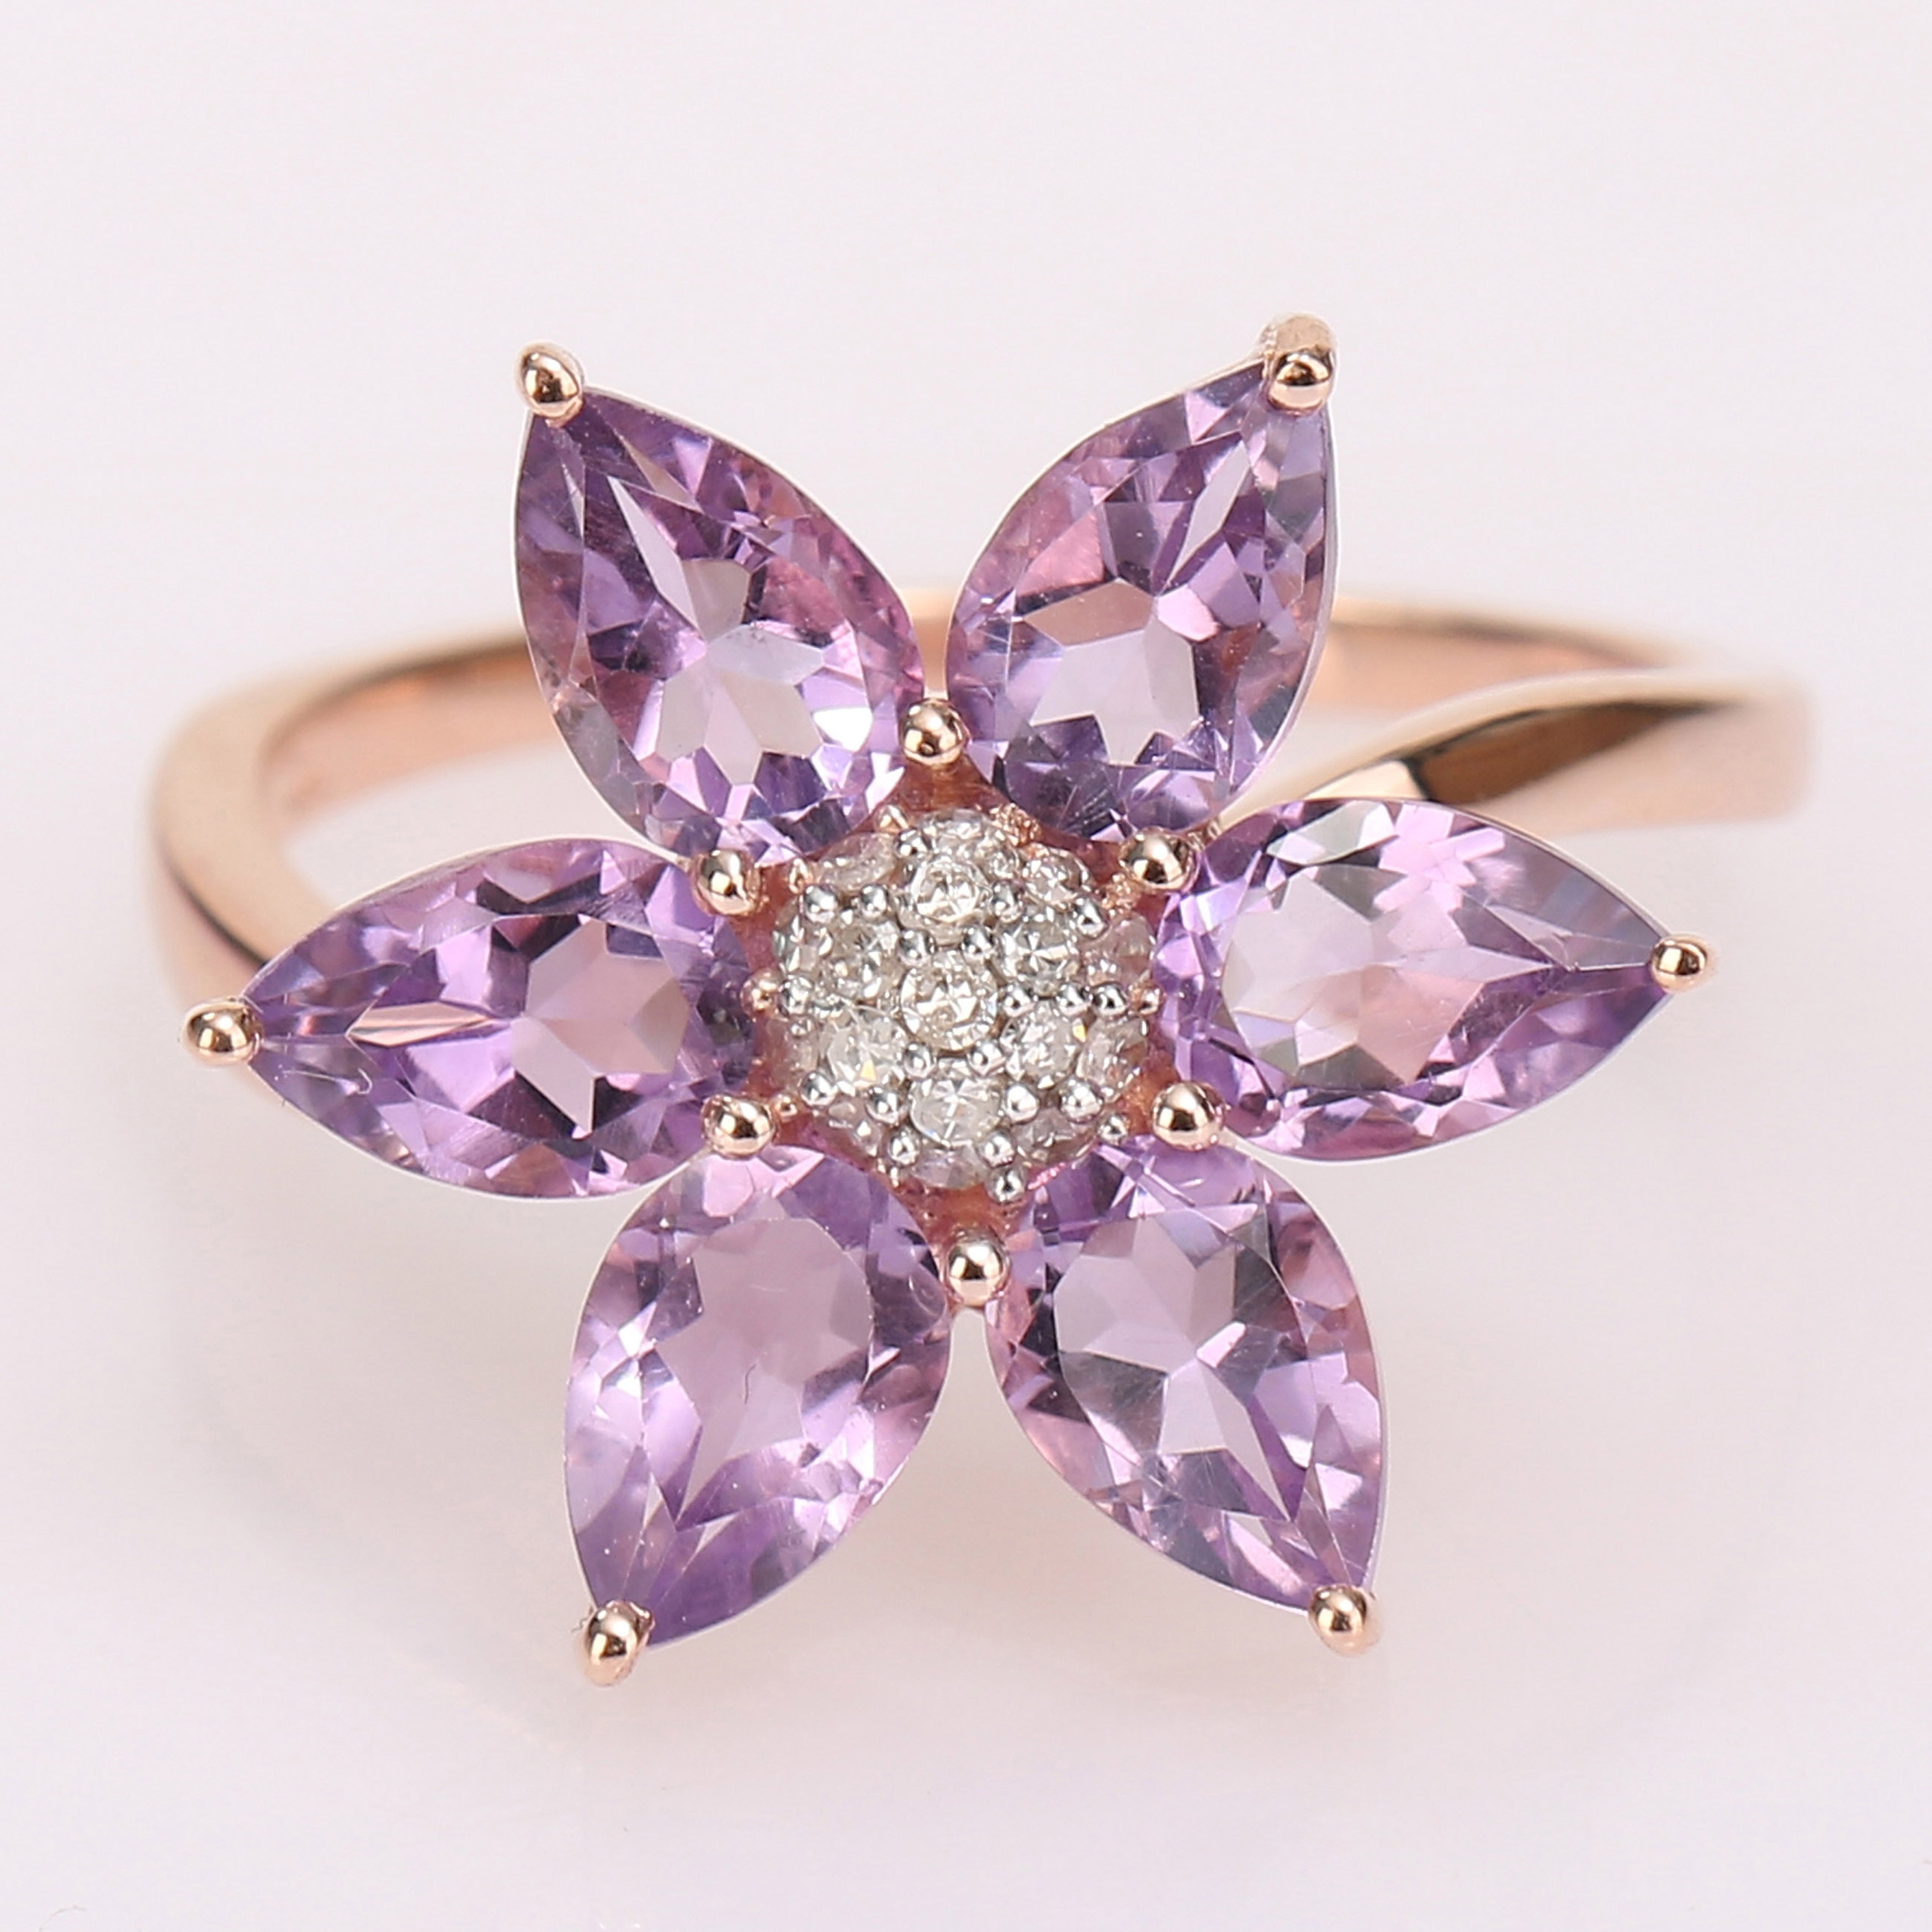 Details about  / Authentic Natural Round Amethyst Flower Ring Women Jewelry Gift Rose Gold Plated